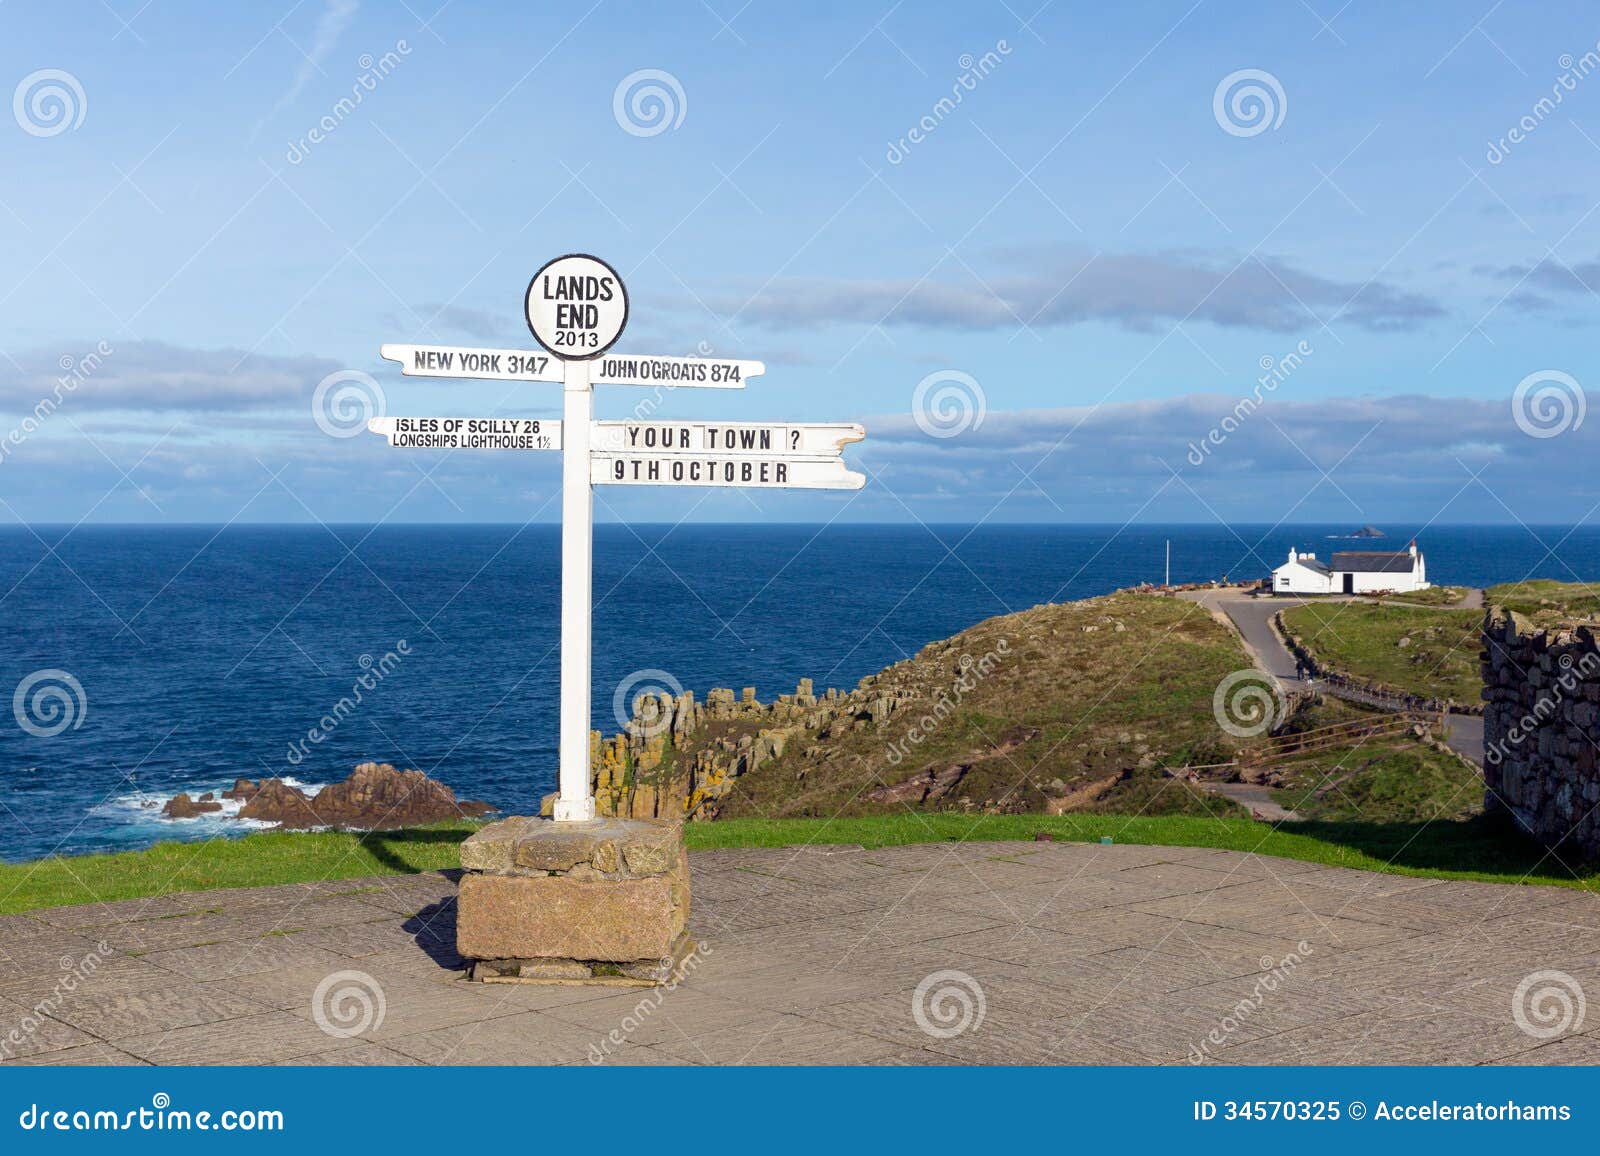 lands end cornwall england uk signpost blue sea and sky